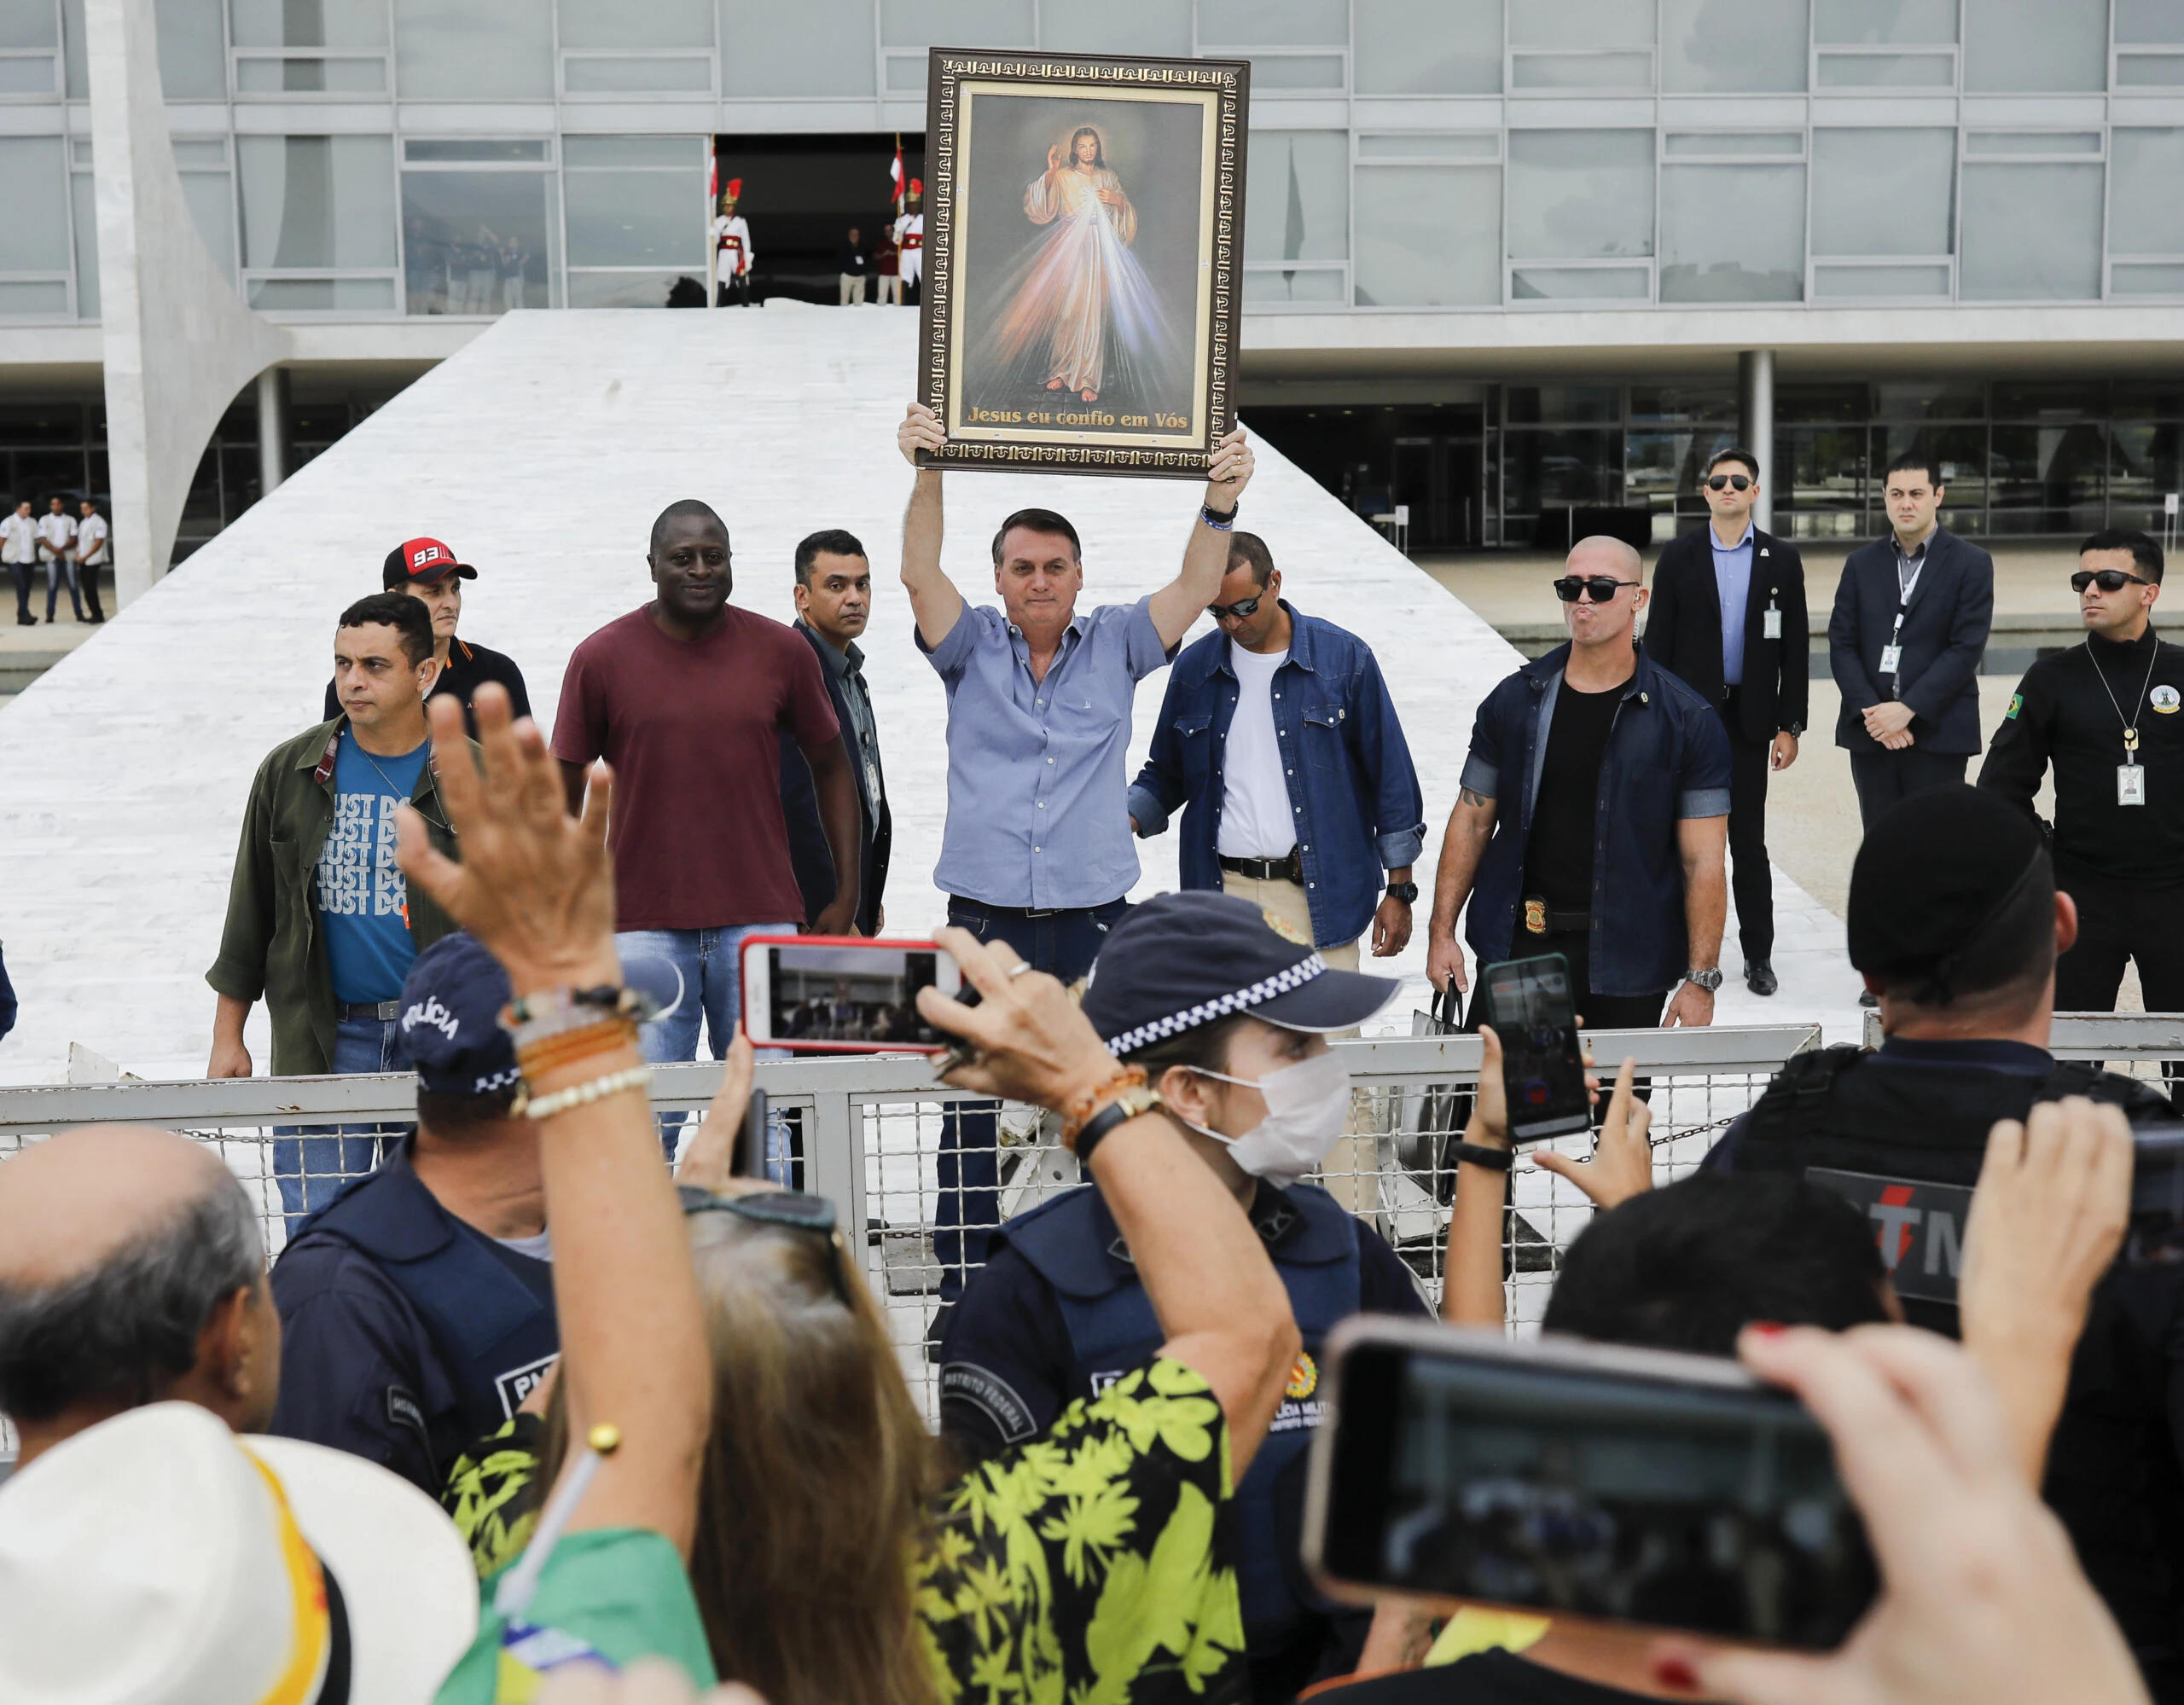 Brazilian President Jair Bolsonaro raises an image of Jesus Christ during a gathering with Catholic and anti-abortion supporters in front of Planalto Palace in Brasilia on April 18, 2020 amid the coronavirus COVID-19 pandemic. - Brazilian President Jair Bolsonaro on Friday defended his decision to restart economic activity in the middle of the coronavirus pandemic, after sacking his health minister over differences in how to tackle the disease. (Photo by Sergio LIMA / AFP) (Photo by SERGIO LIMA/AFP via Getty Images)